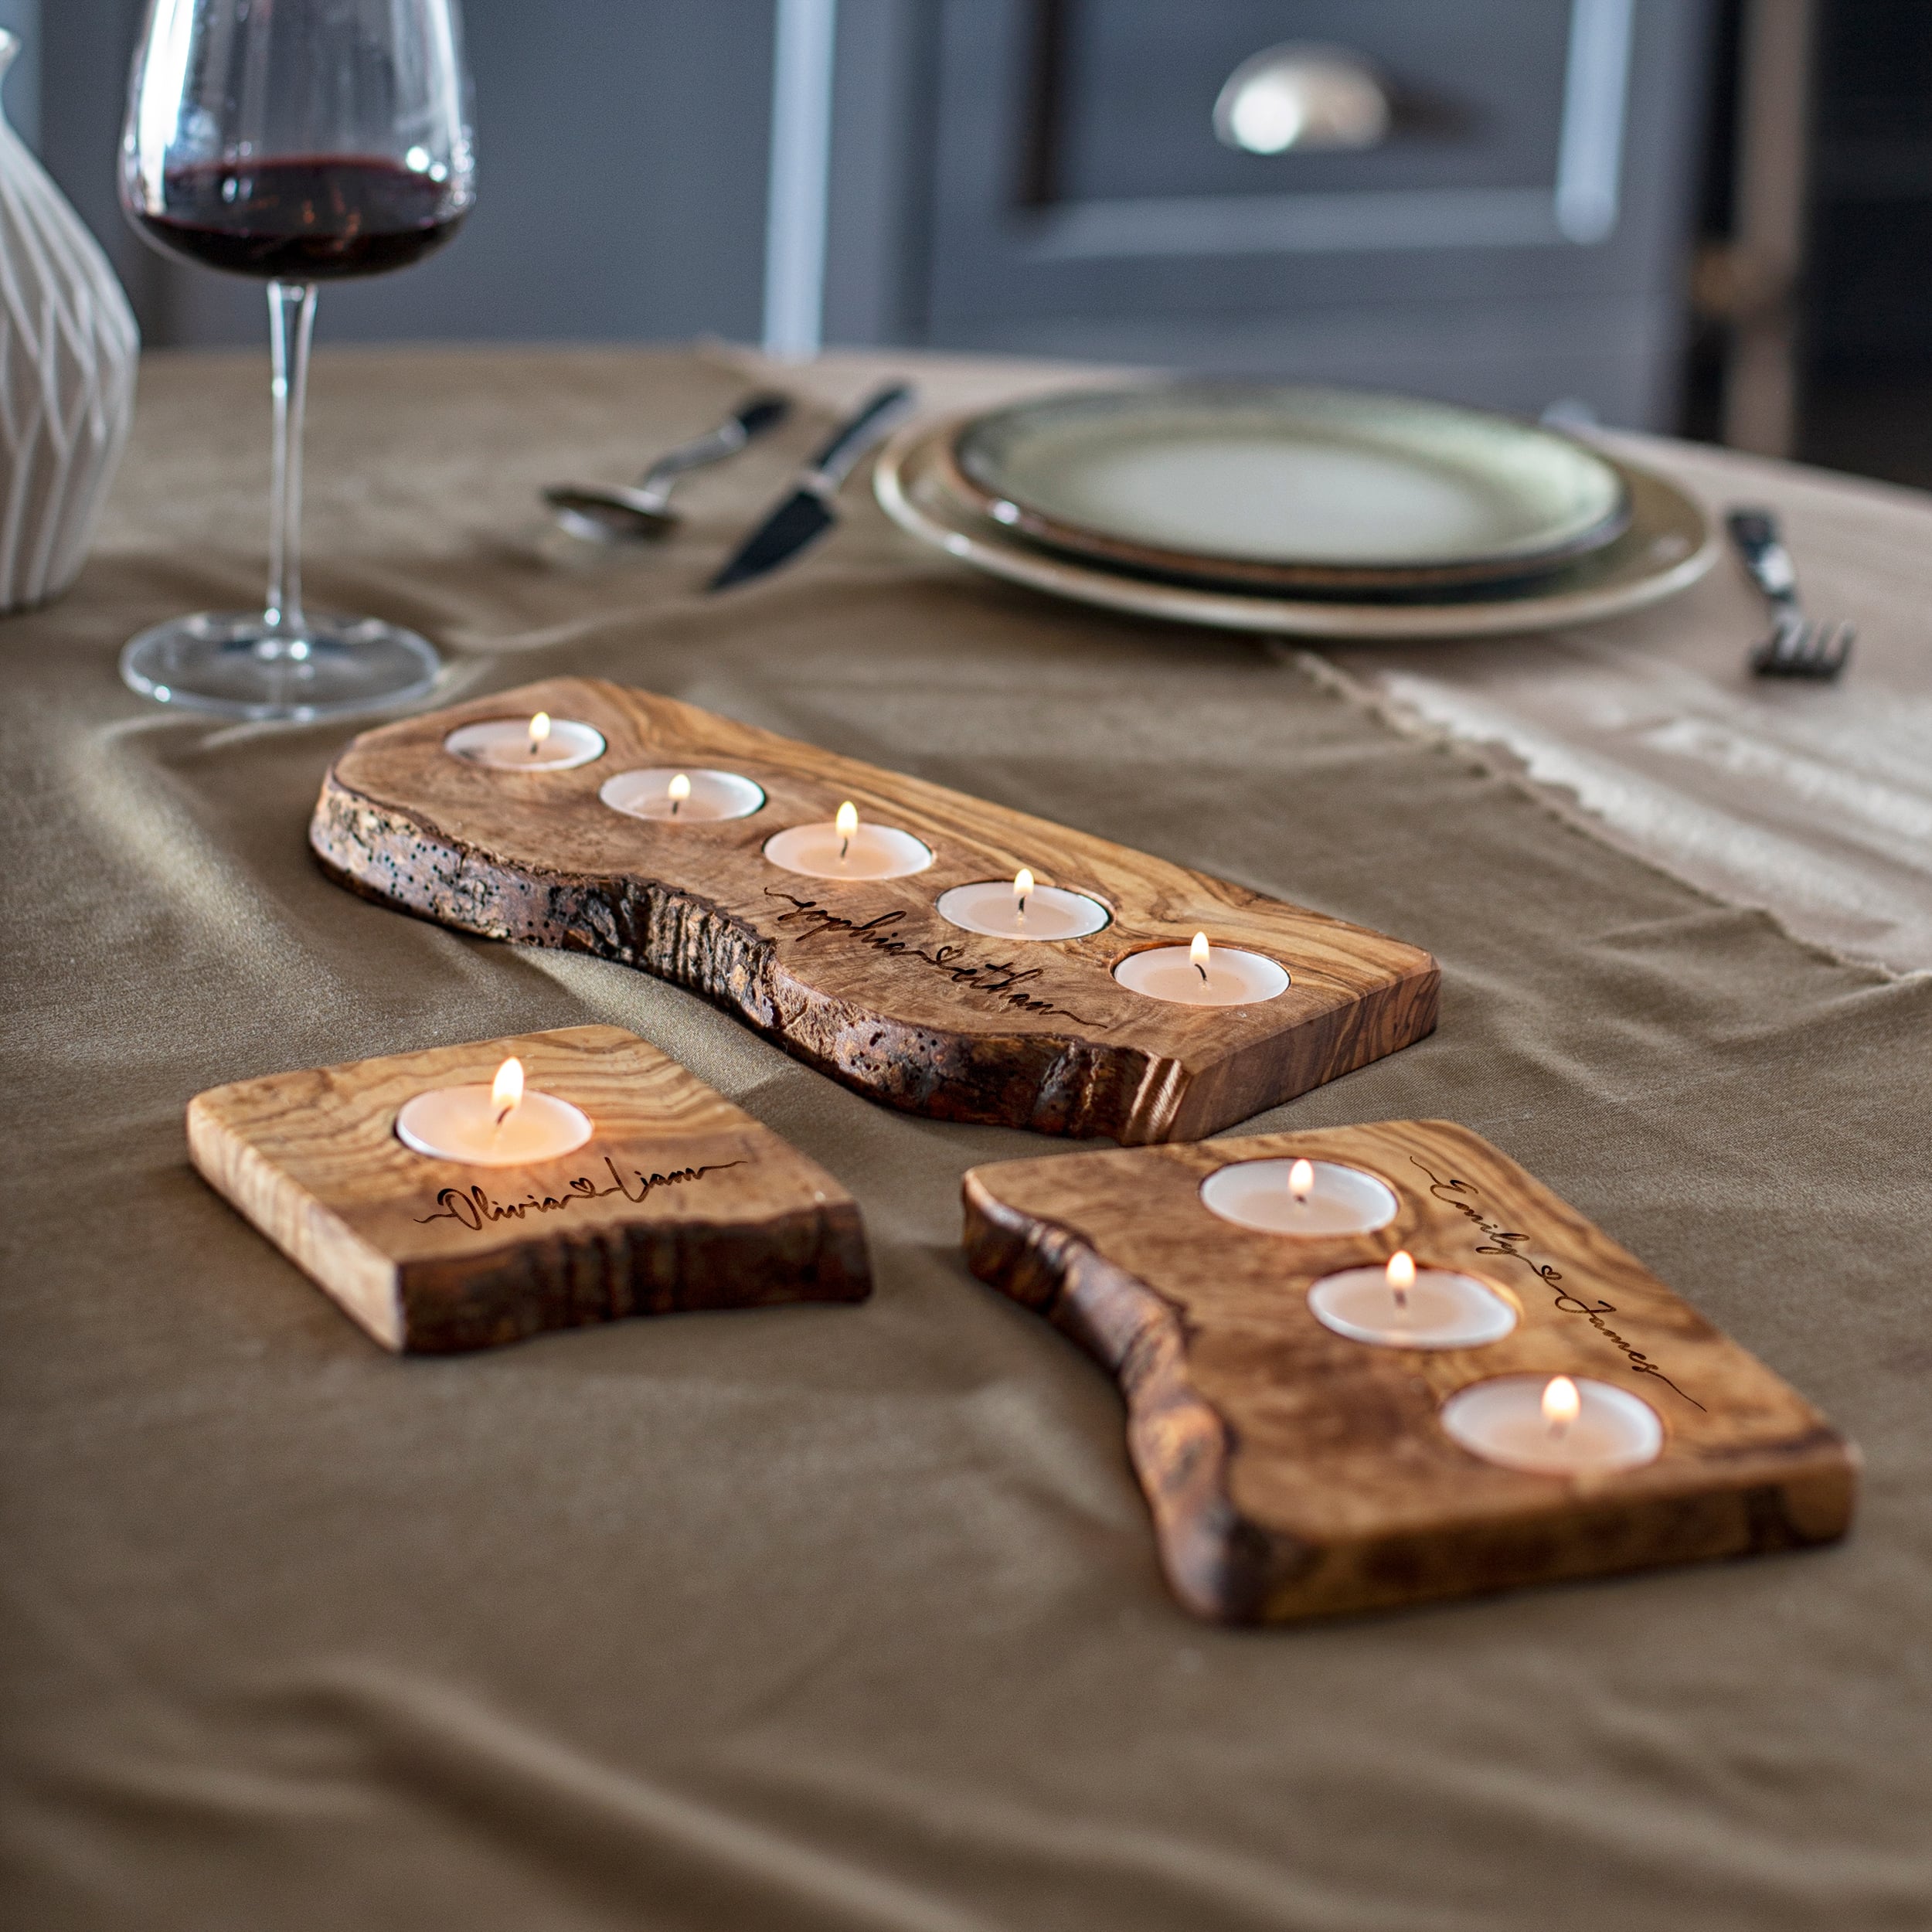 Rustic wooden candle holders with lit tea candles on a table, set beside a wine glass and dinnerware.